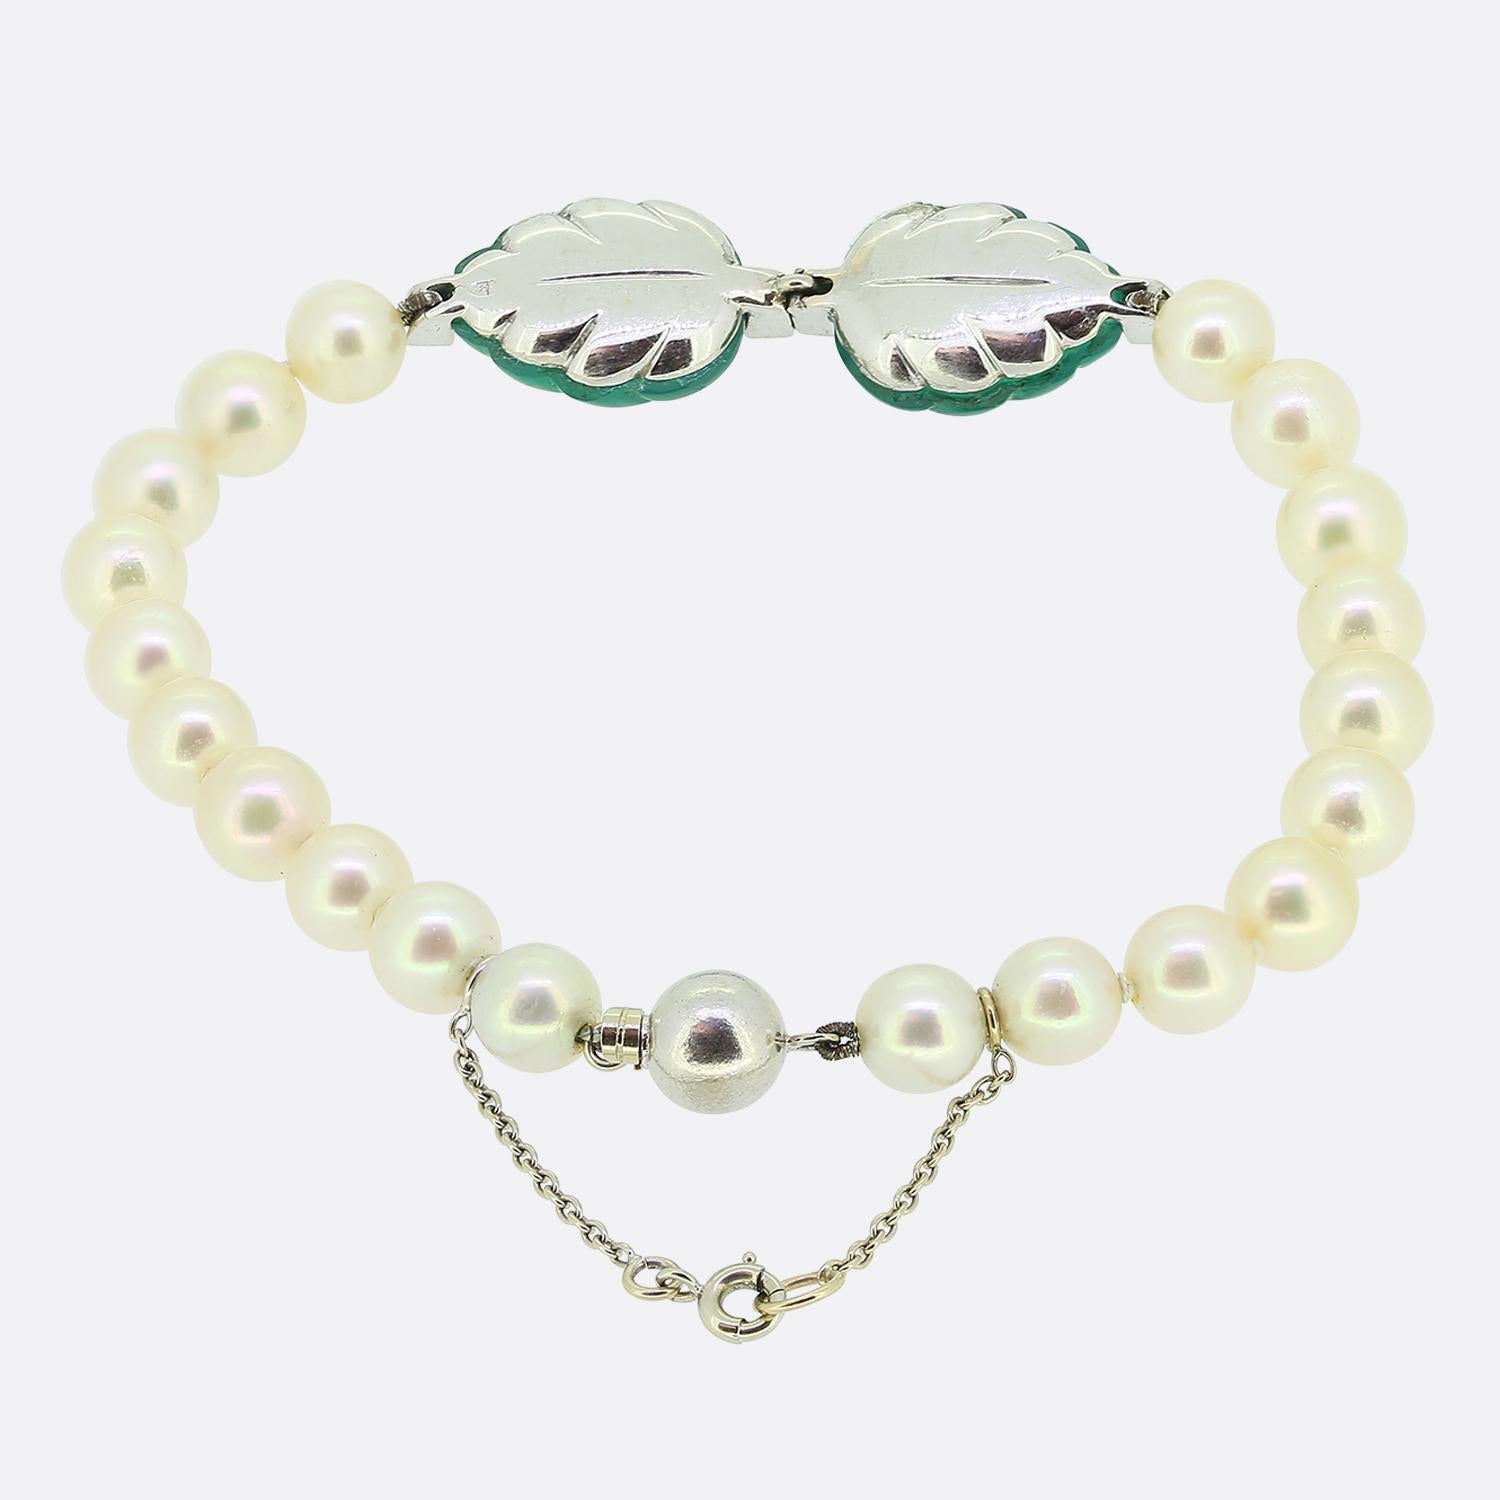 Here we have a delightful bracelet from the world renowned luxury jewellery house of Cartier. This piece is comprised of ten wonderfully matched, individually knotted rounded pearls in a single line formation. Each individual pearl displays a lovely